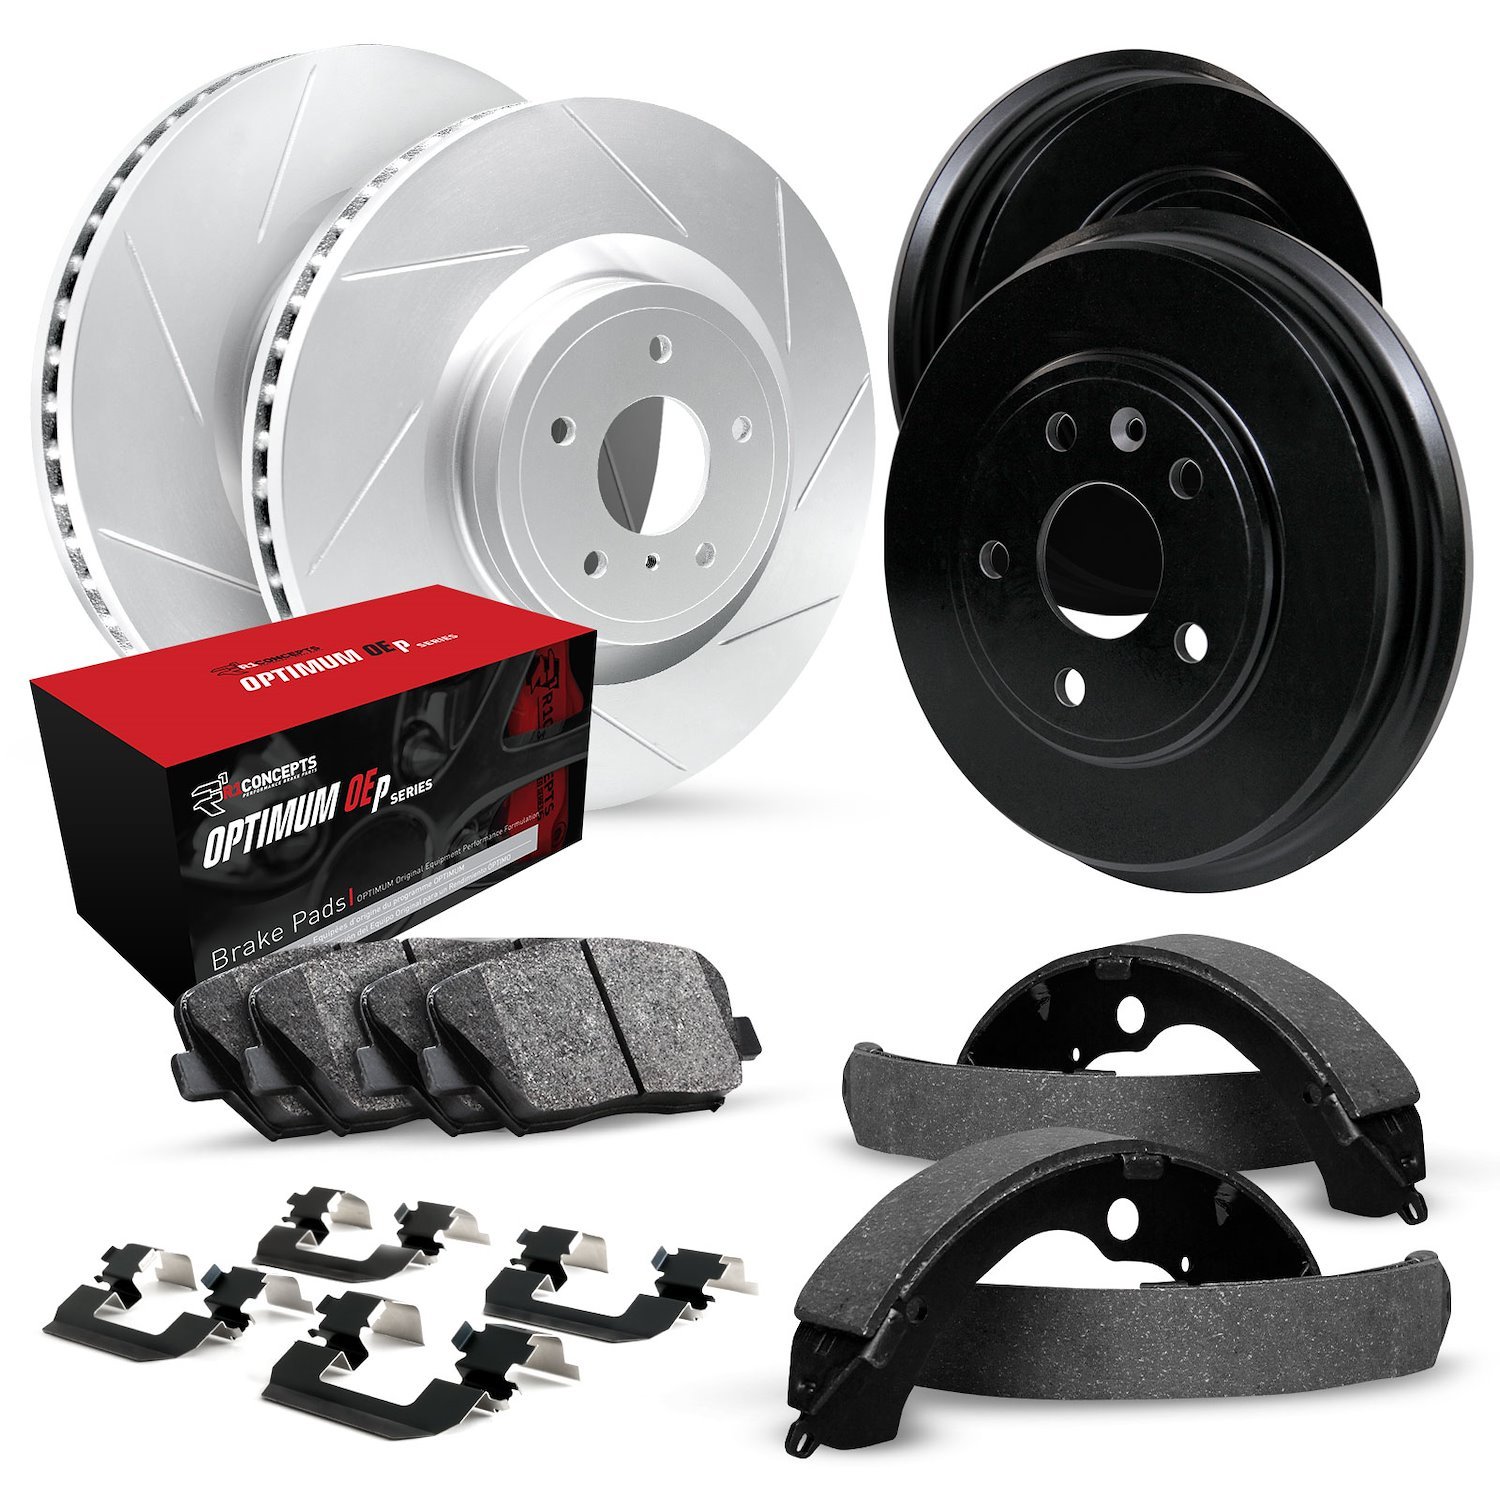 GEO-Carbon Slotted Brake Rotor & Drum Set w/Optimum OE Pads, Shoes, & Hardware, 1992-2001 GM, Position: Front & Rear